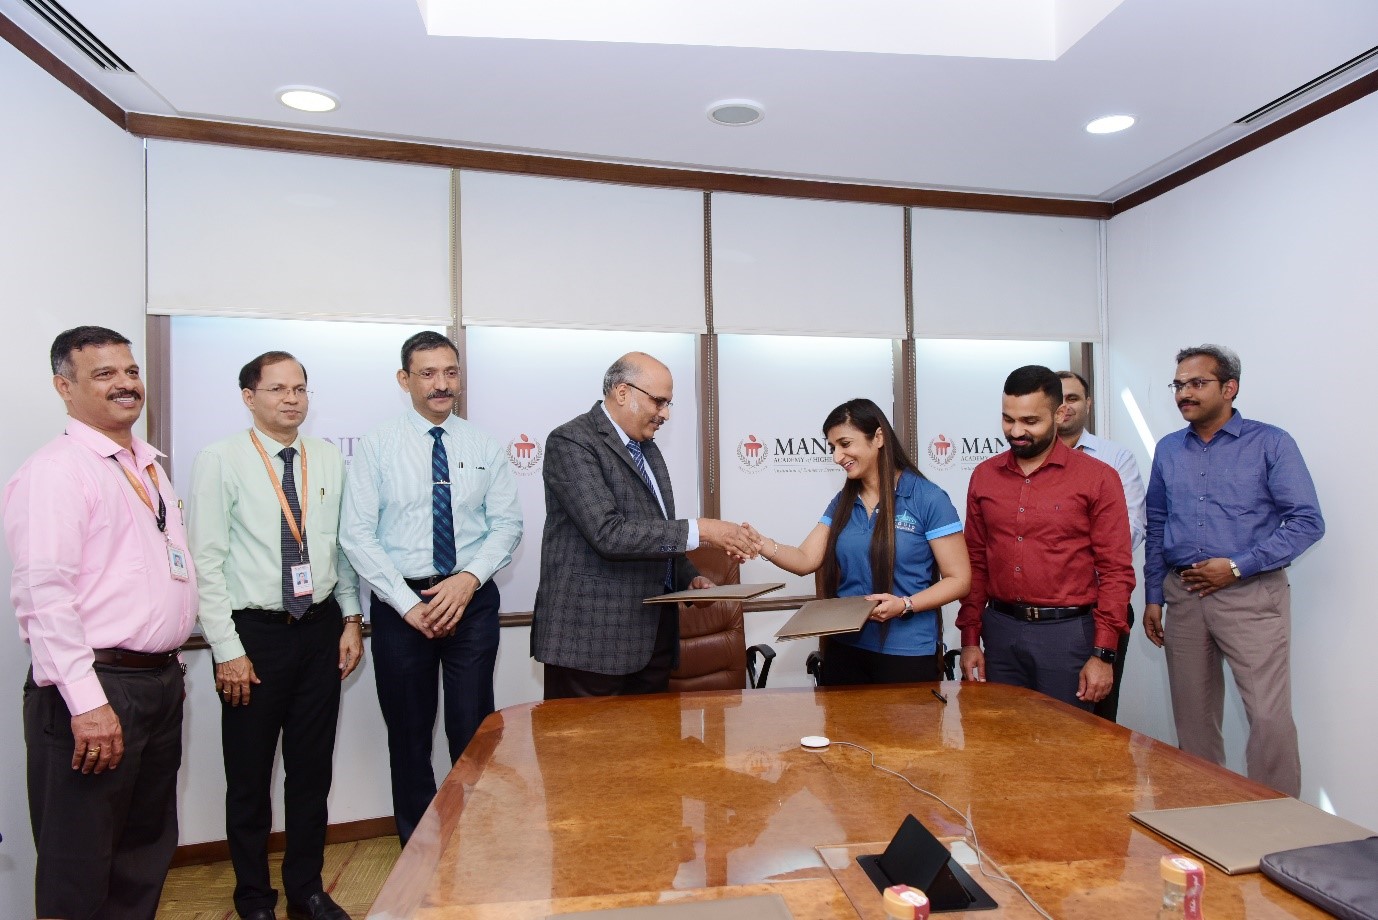 MoU established between, MIT MAHE, Dept. of Instrumentation & Control Engineering, Liquid Instruments Canberra, & Centre of Excellence